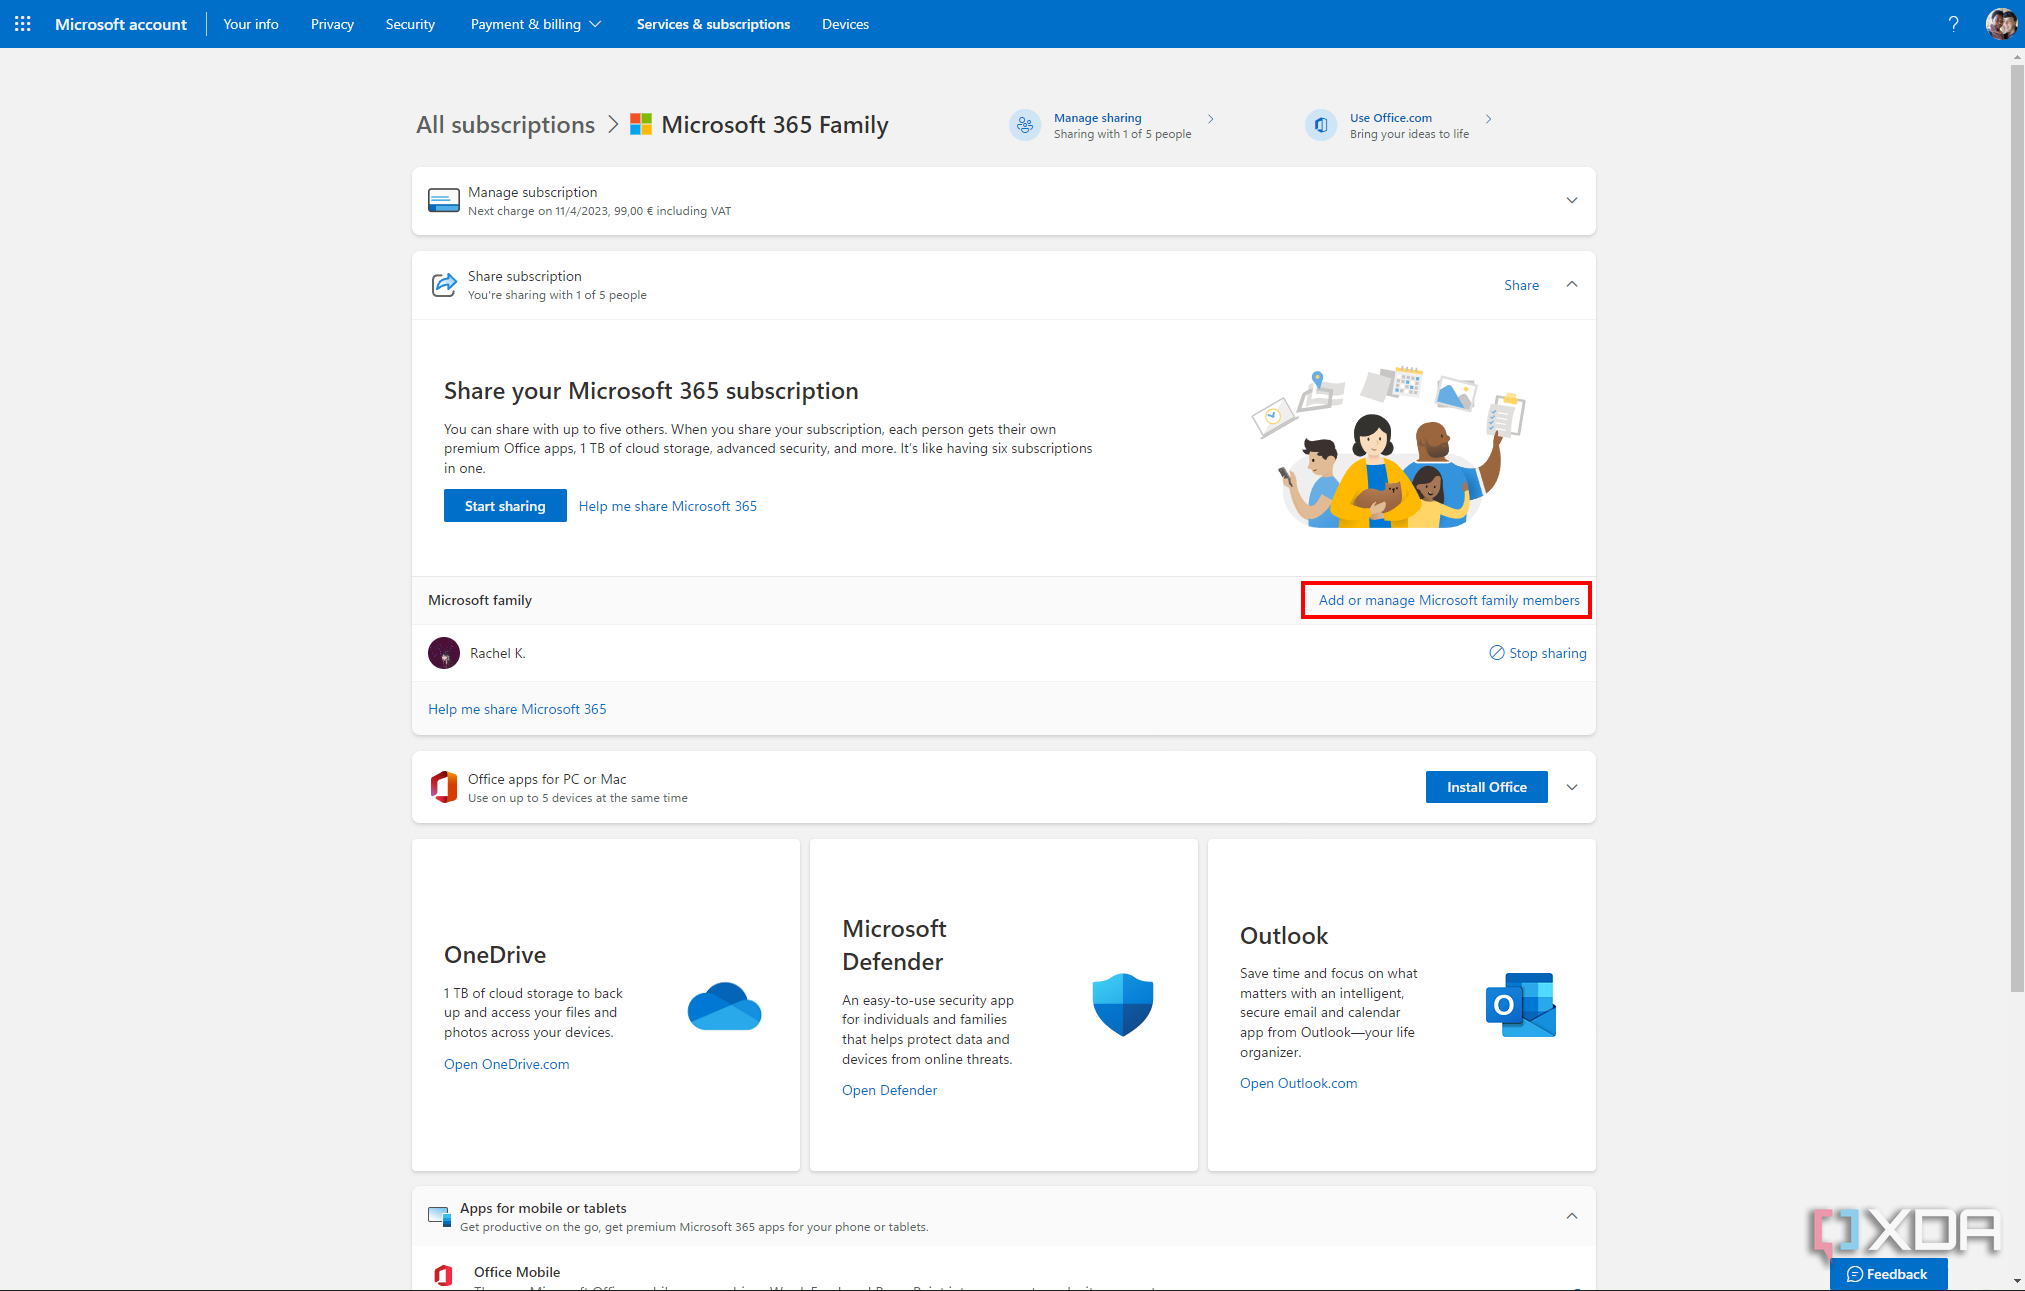 Screenshot of the Microsoft services page on Microsoft's website with the Add or manage family members button highlighted